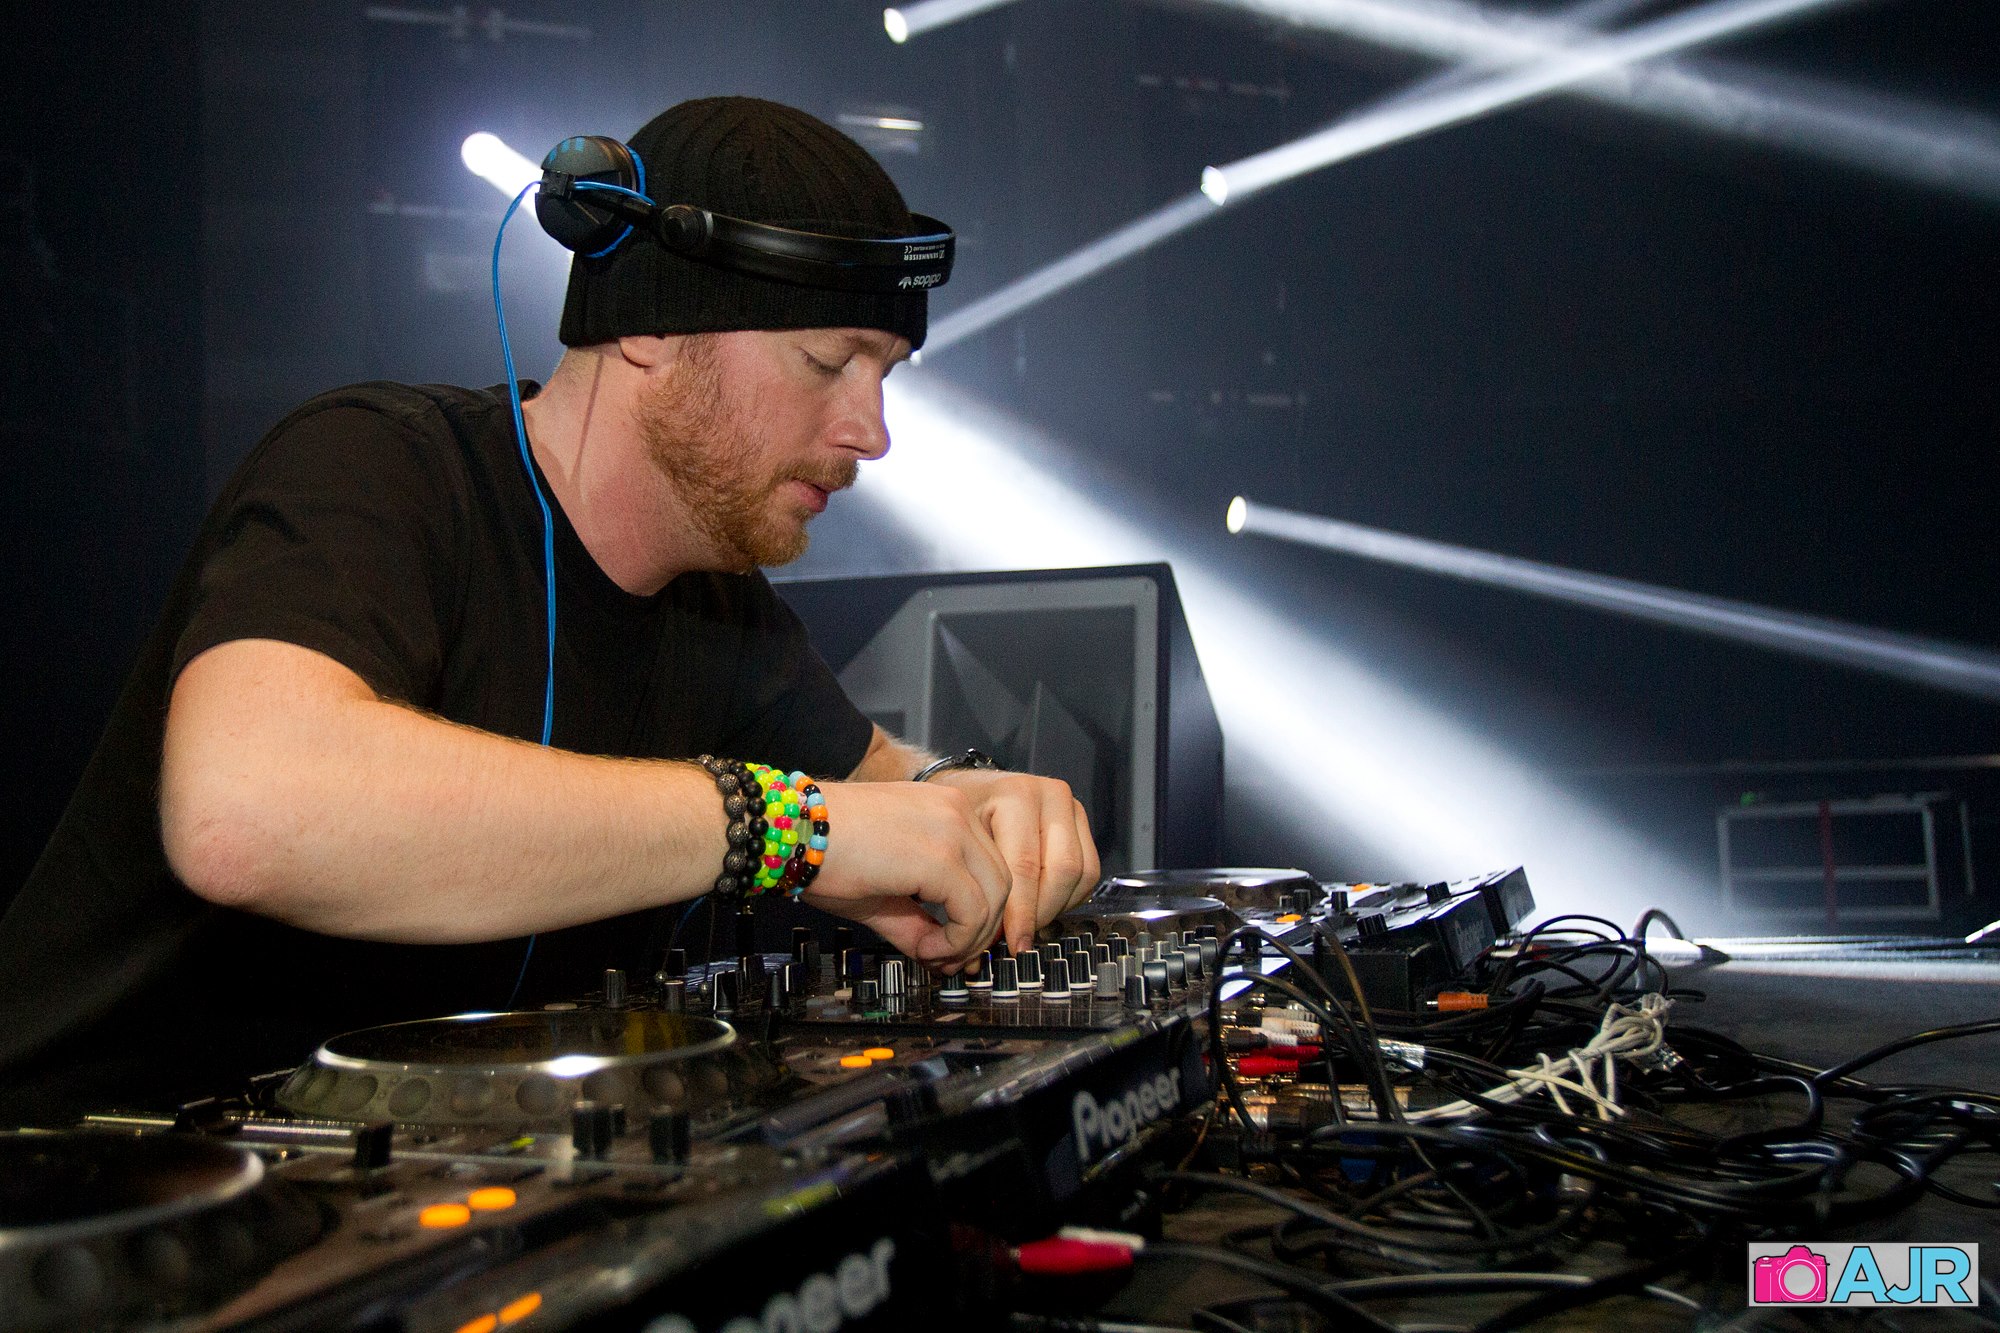 Eric Prydz Pics, Music Collection